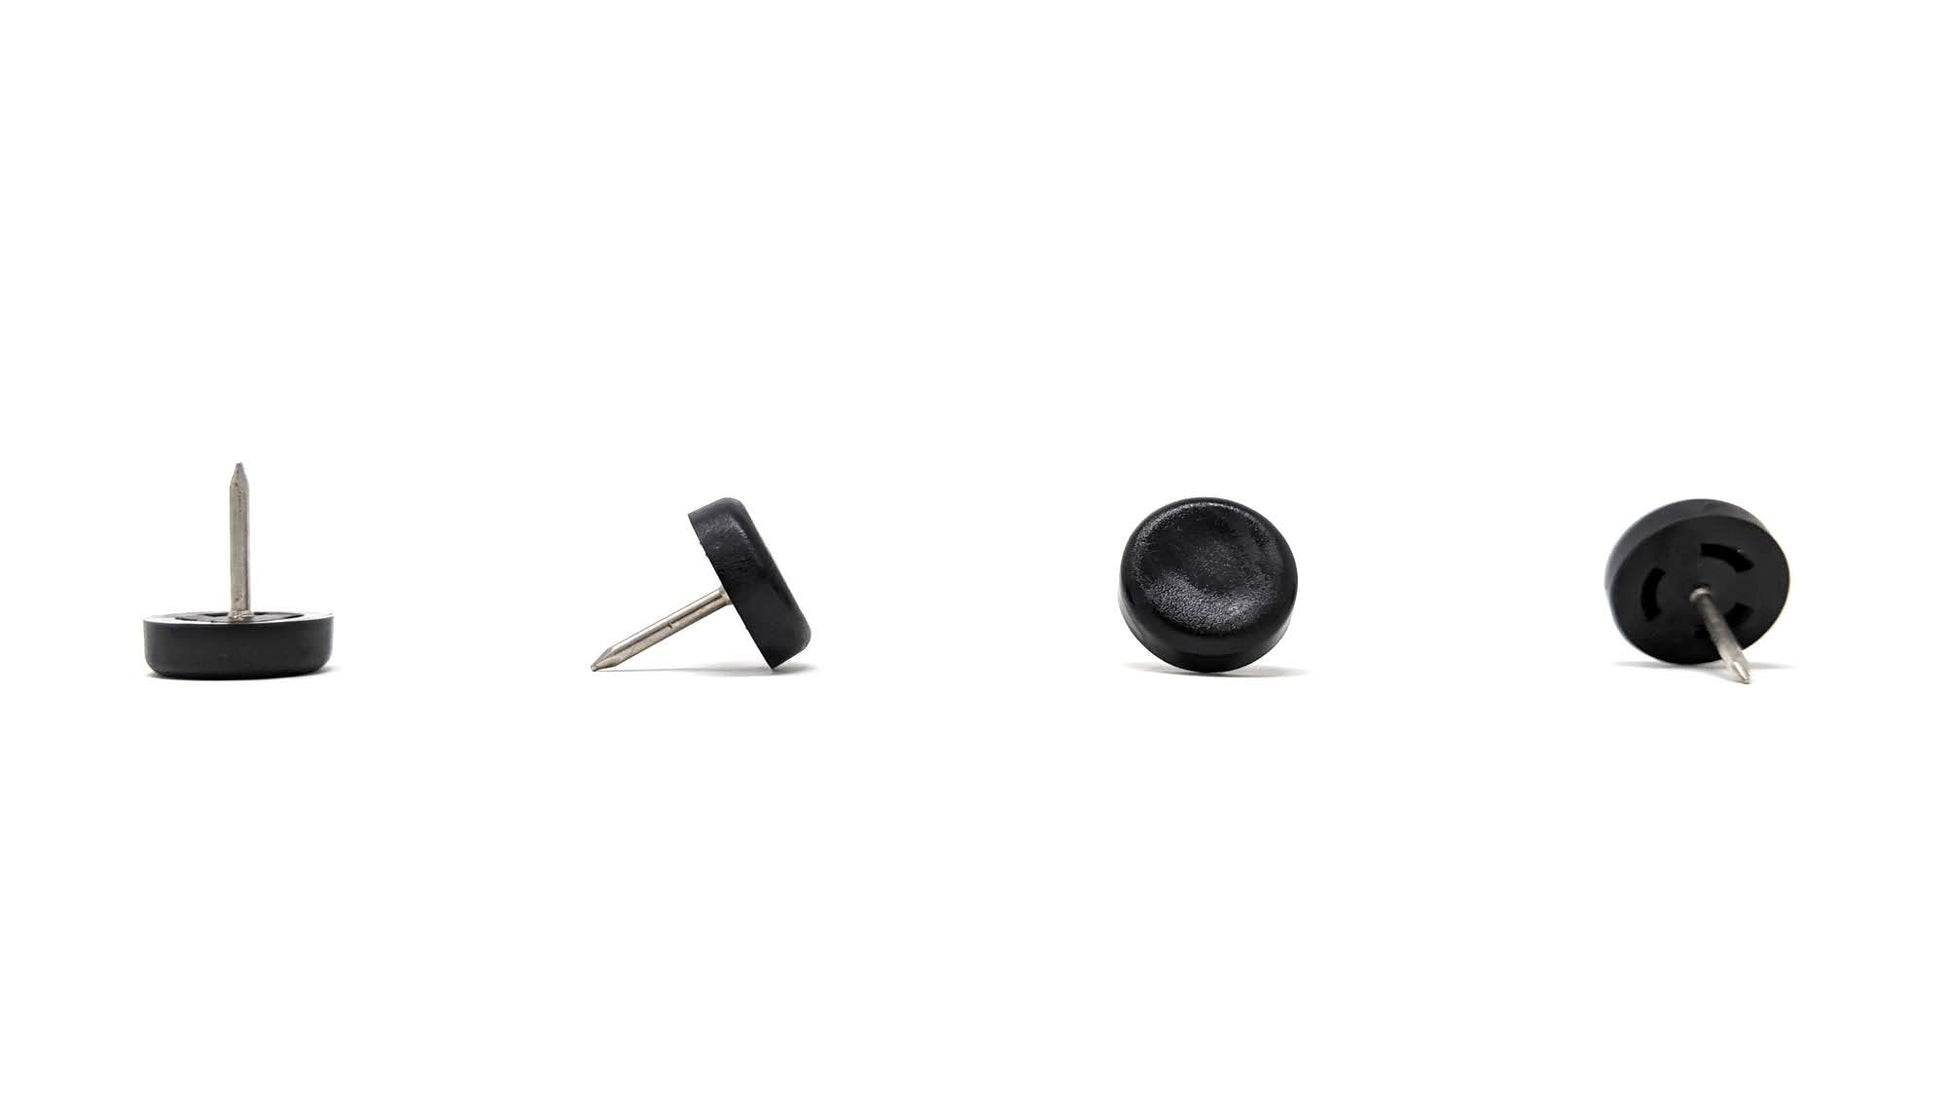 18mm Black Plastic Nail On Gliders - Made in Germany - Keay Vital Parts